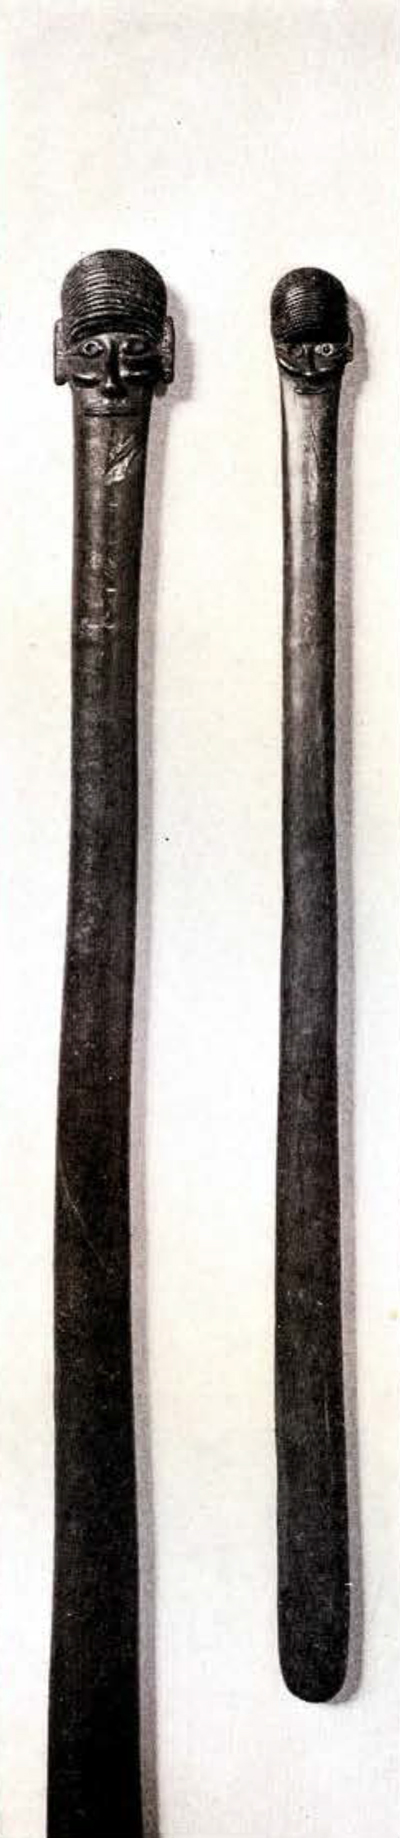 Two wooden staves, full length, one end of each carved into a head and face